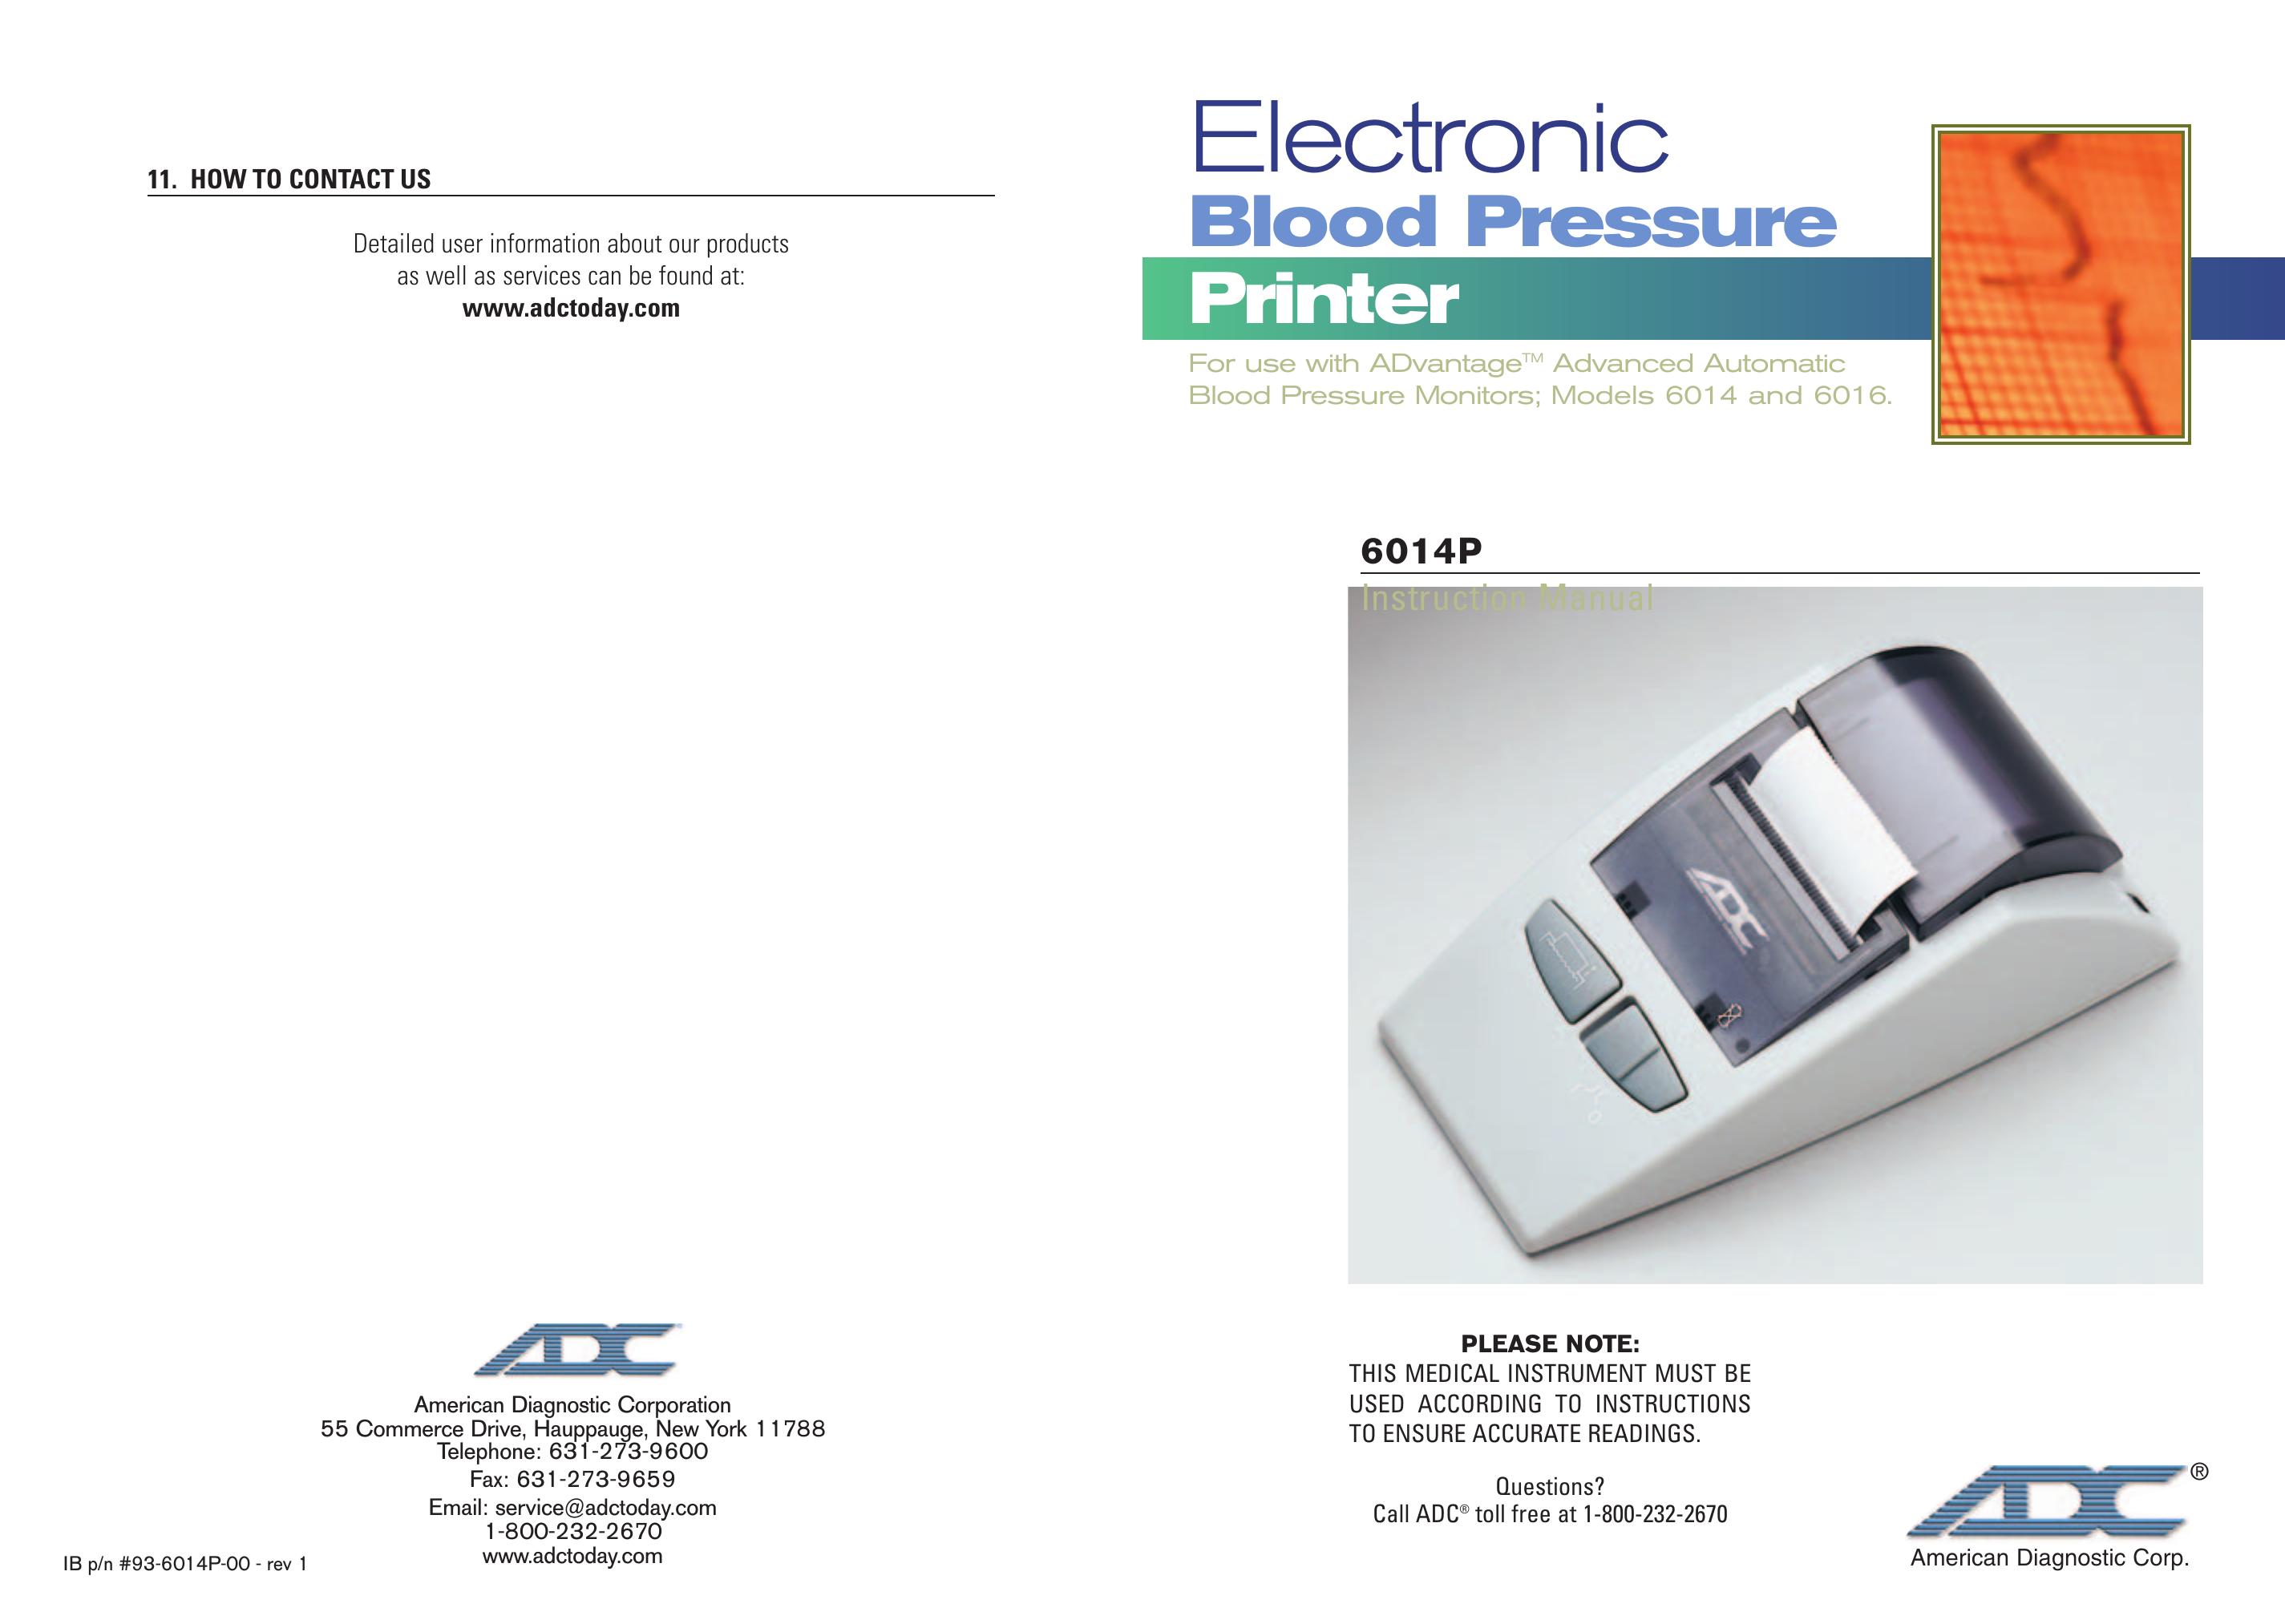 ADC 6014 Blood Pressure Monitor User Manual (Page 1)